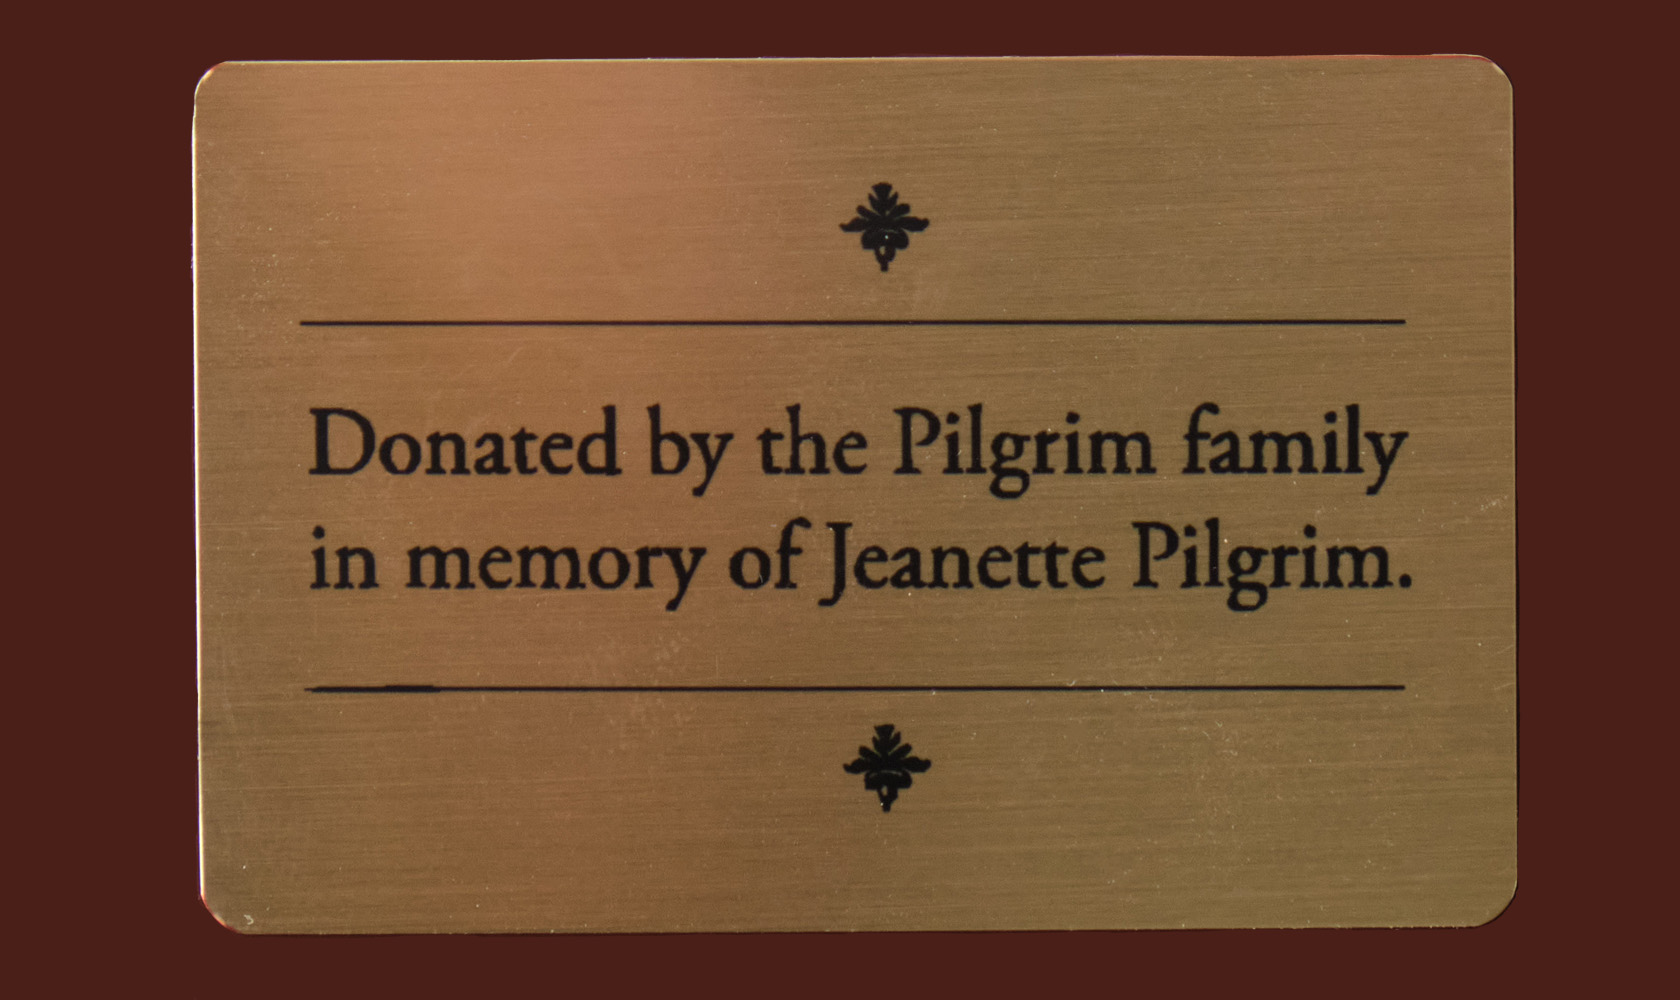 Memorial plaque affixed to the harpsichord commemorating the donation.